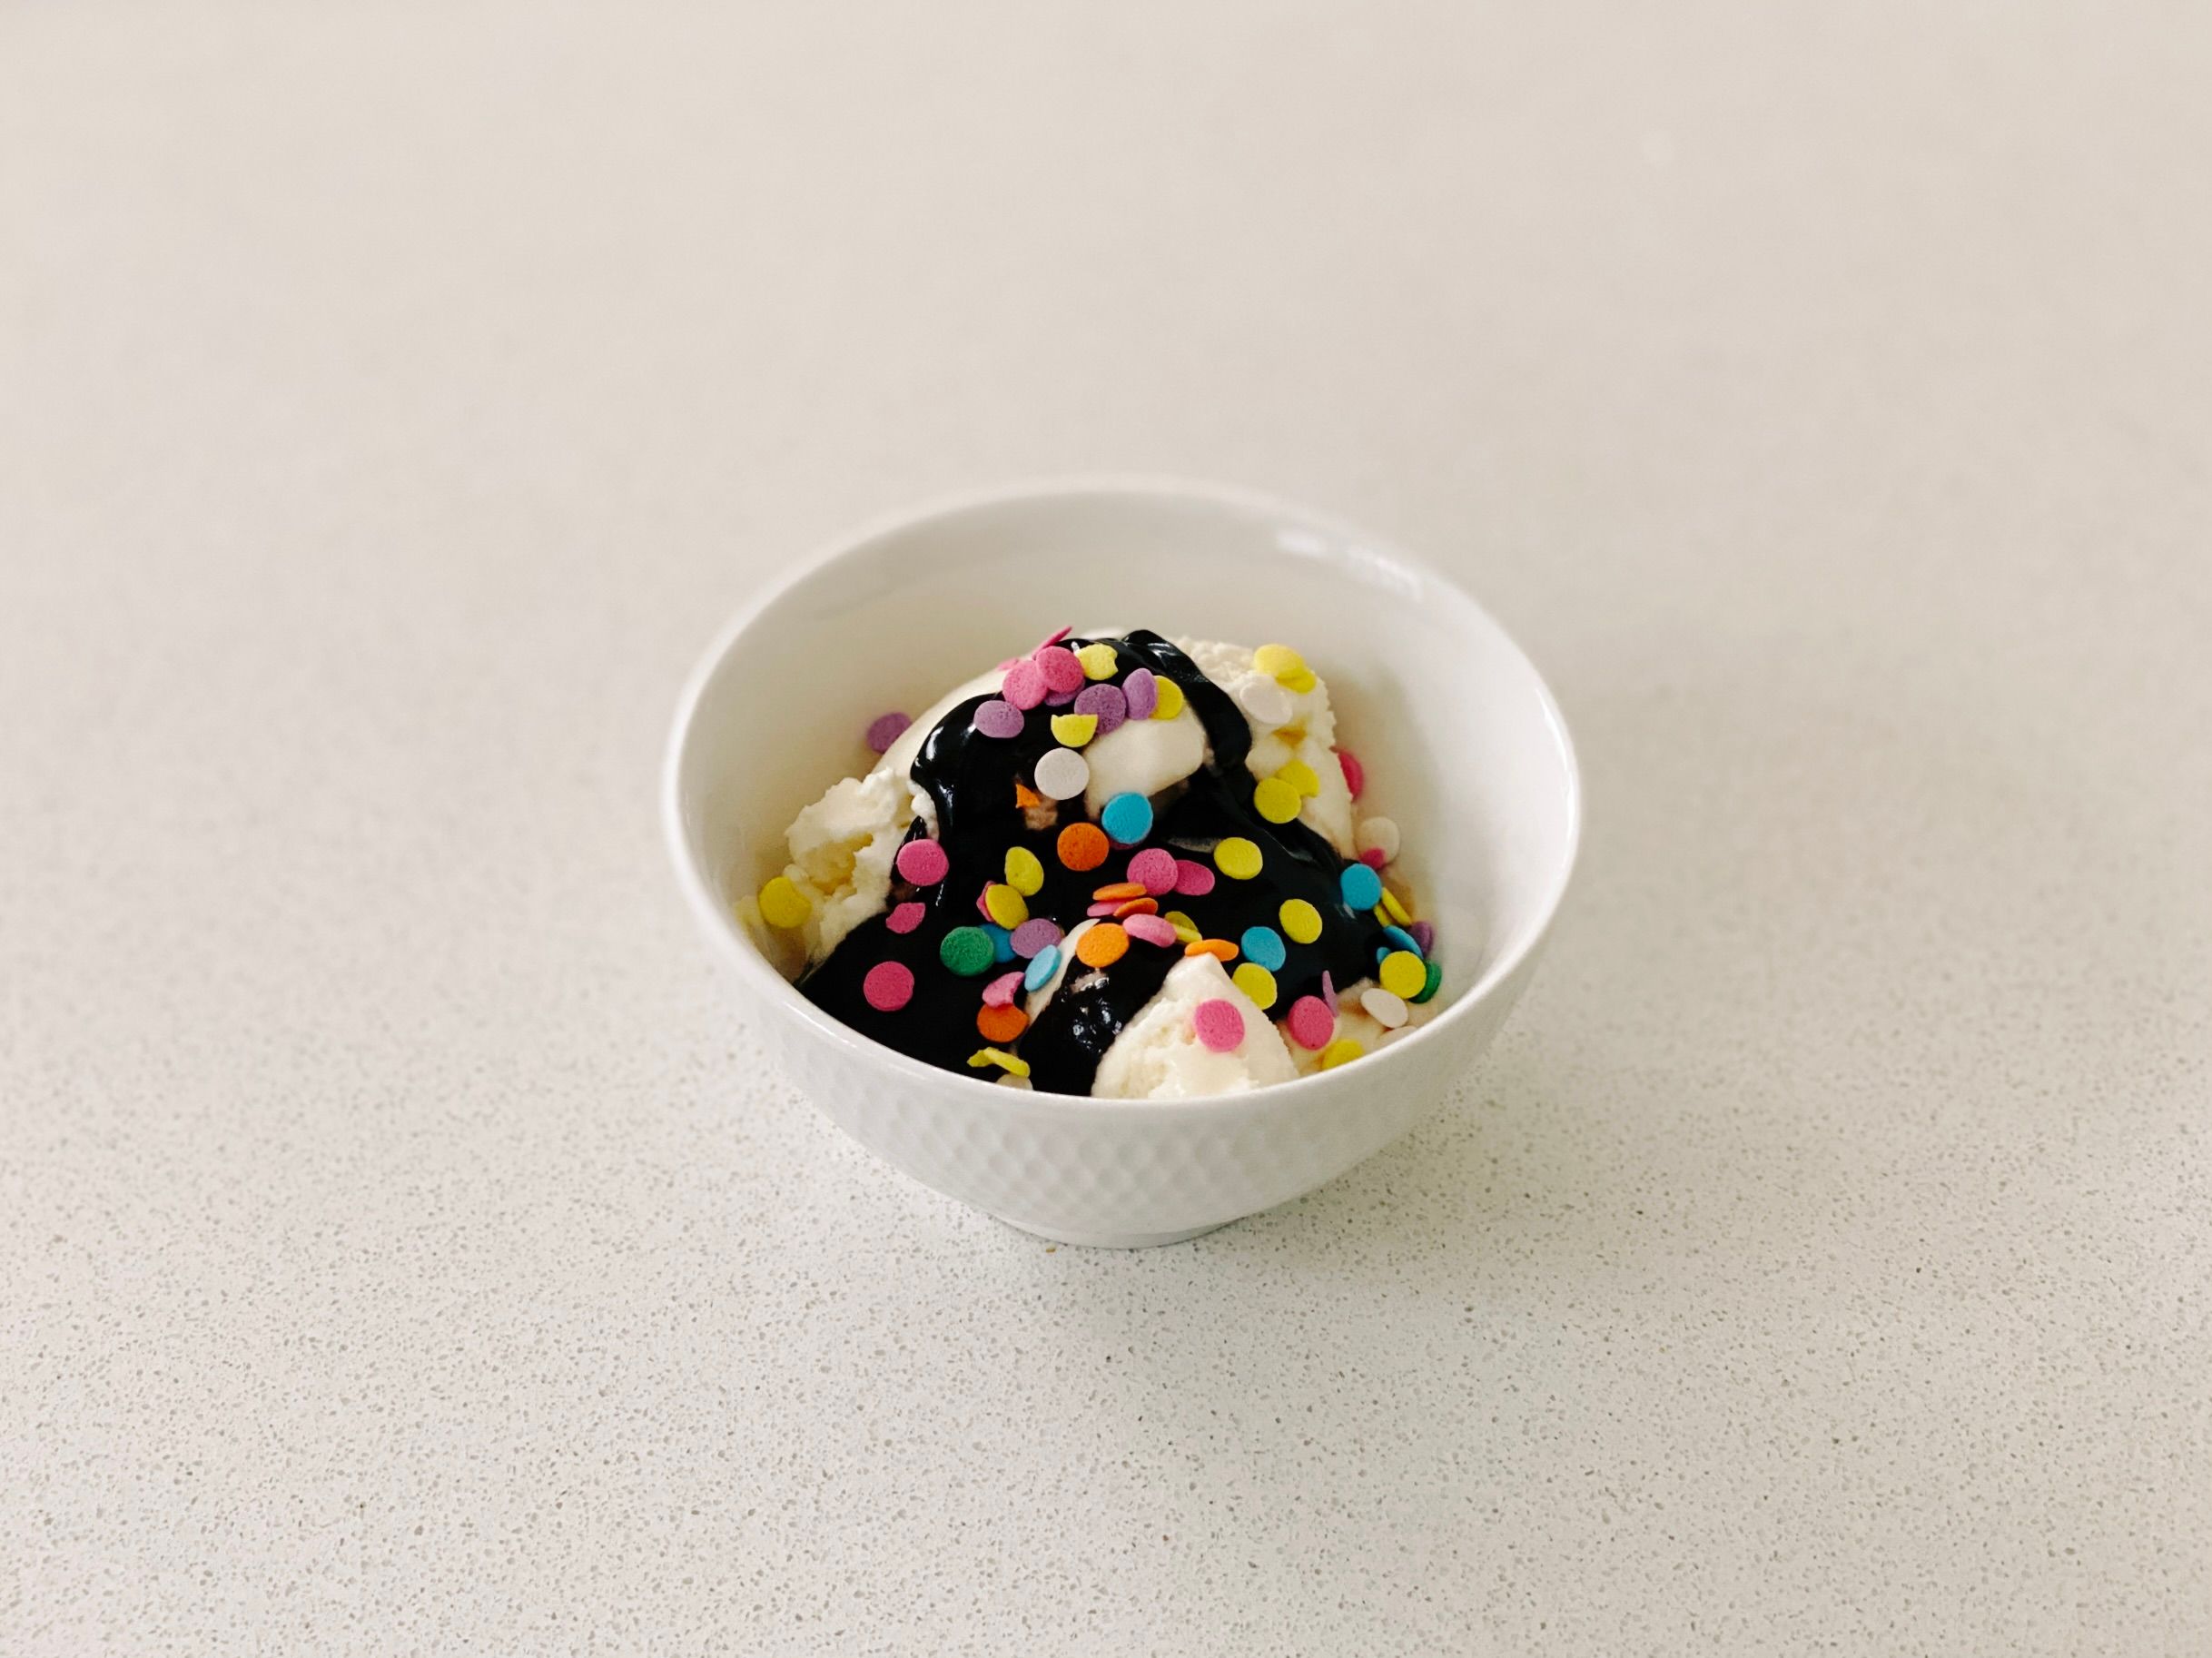 A photo of a little bowl of ice cream with hot fudge on top and multi-coloured sprinkles.